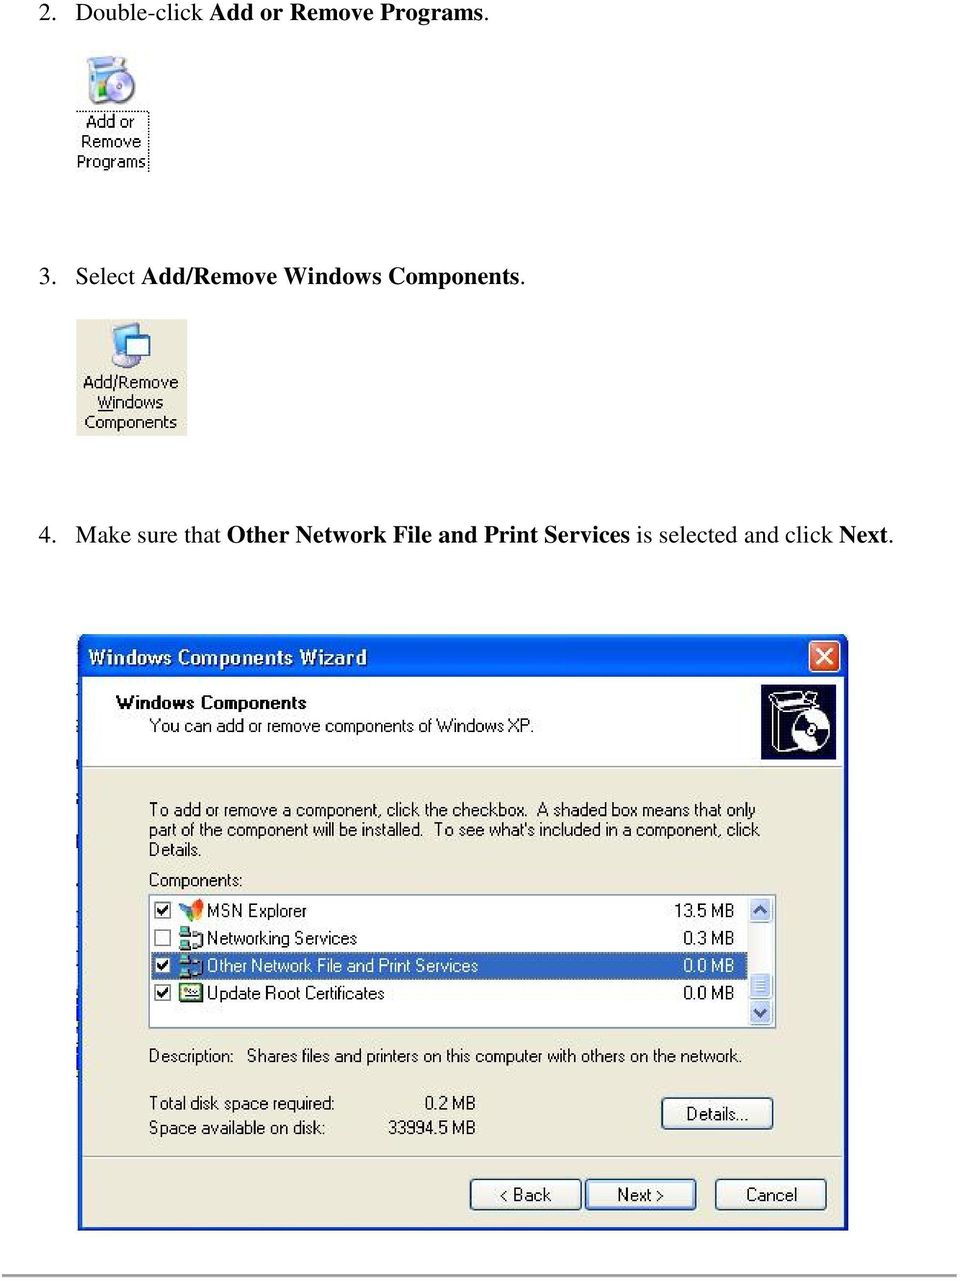 4. Make sure that Other Network File and